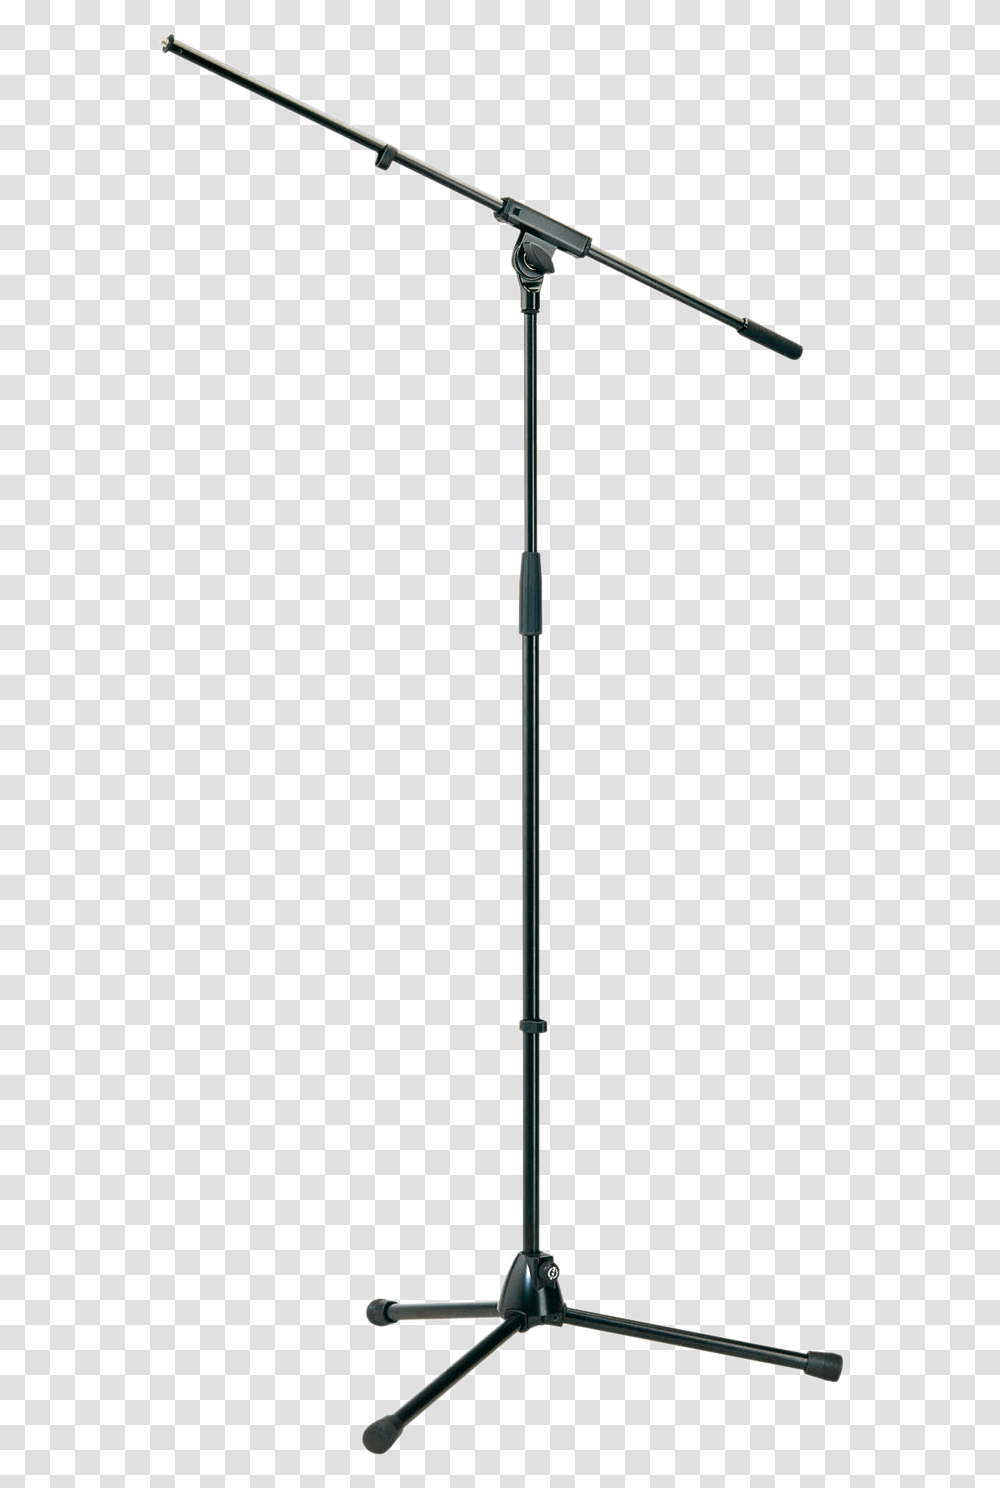 Microphone Stands Recording Studio M Audio Full Compass Microphone Stand, Lighting, Lamp Post, Utility Pole, Tripod Transparent Png